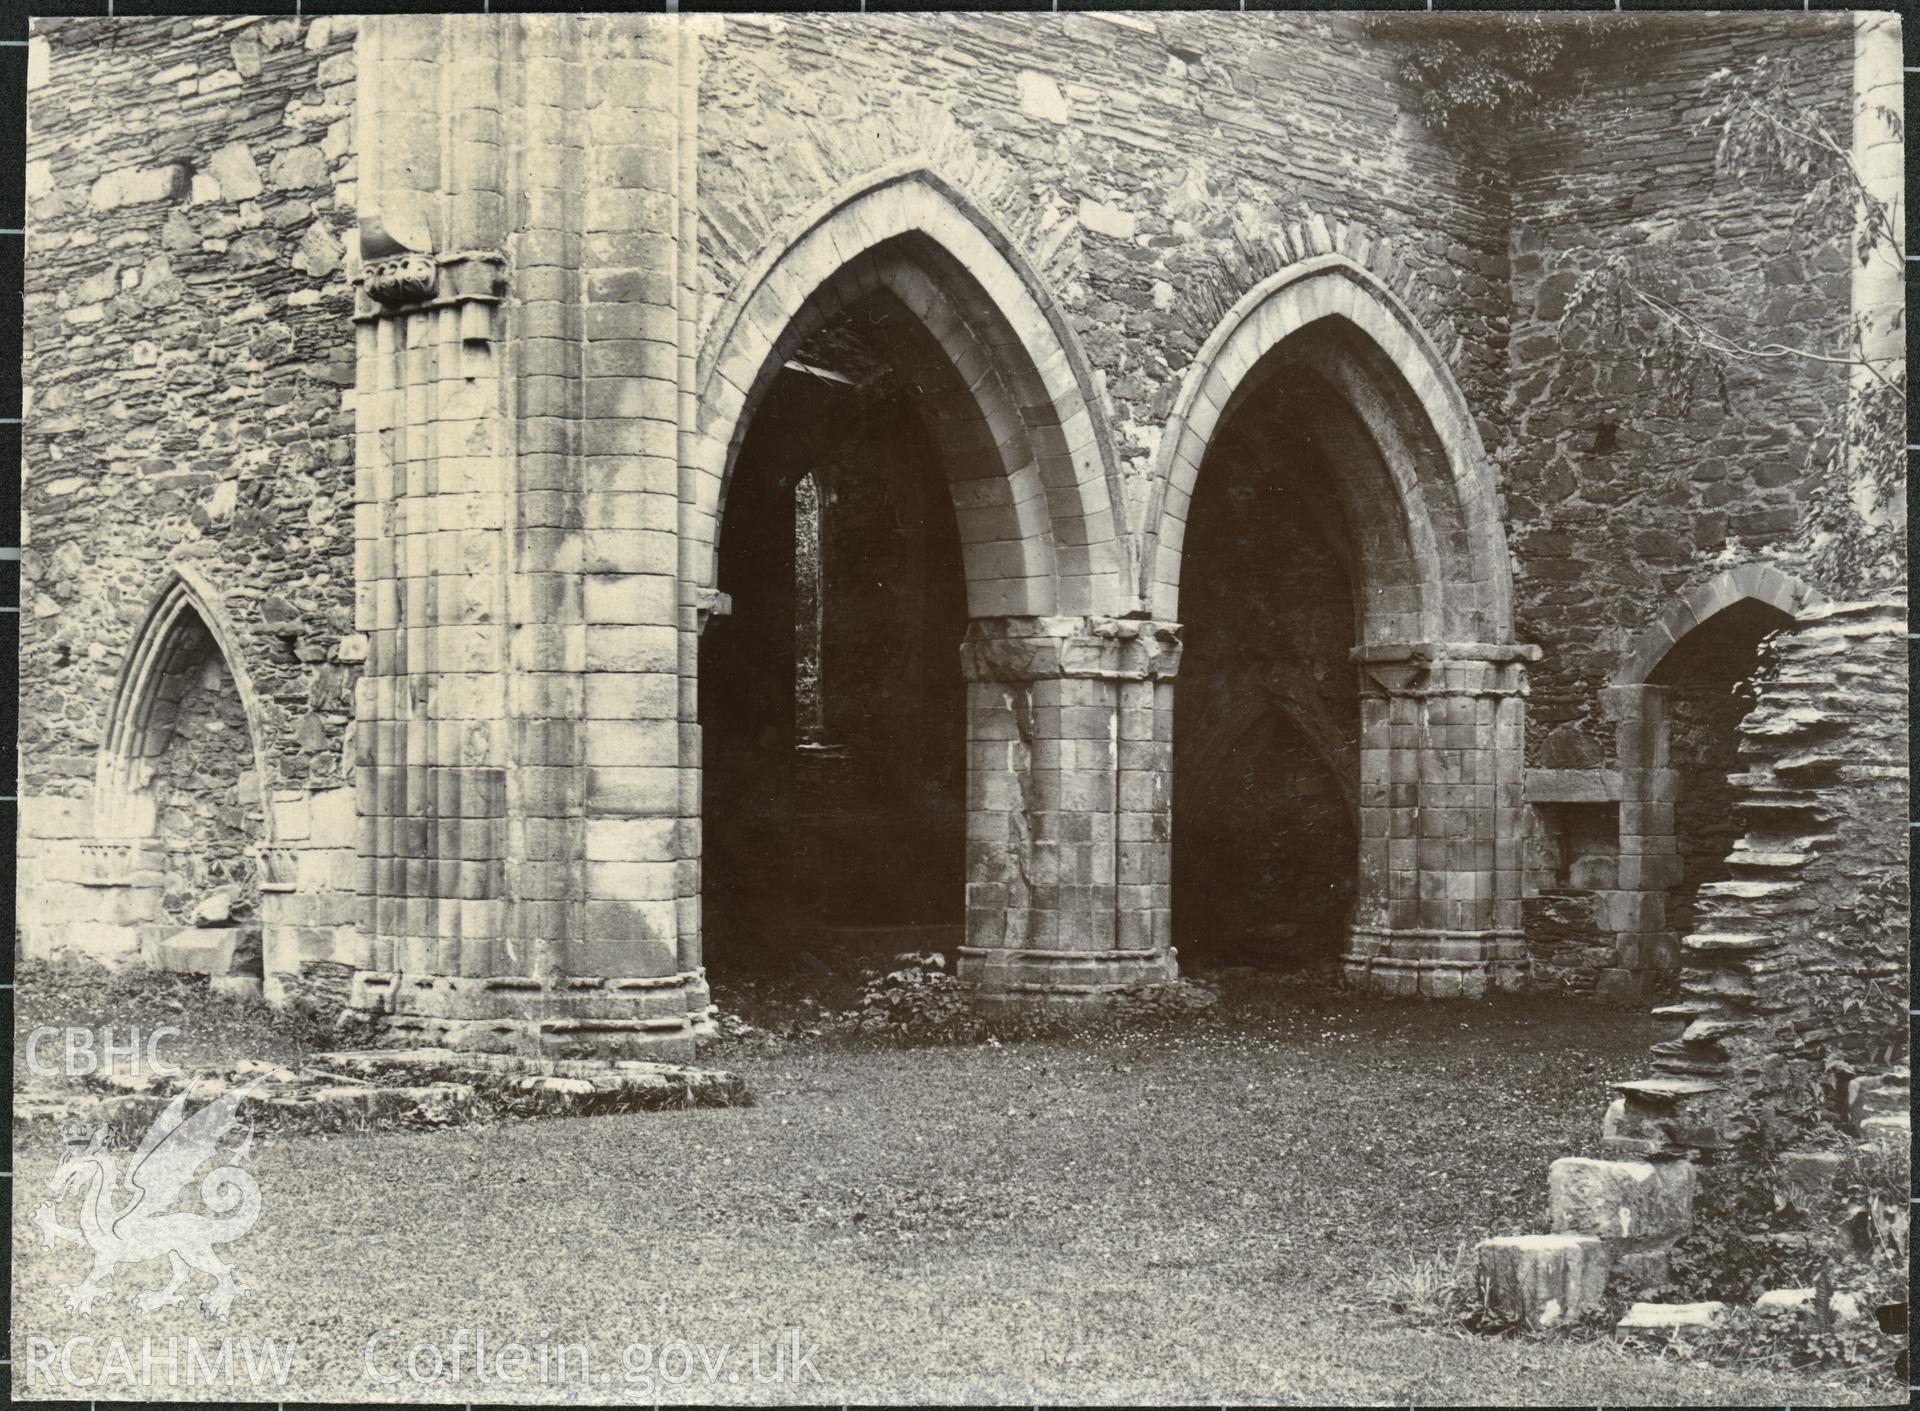 Albumen print by T.W. Reader showing arches at Valle Crucis Abbey.